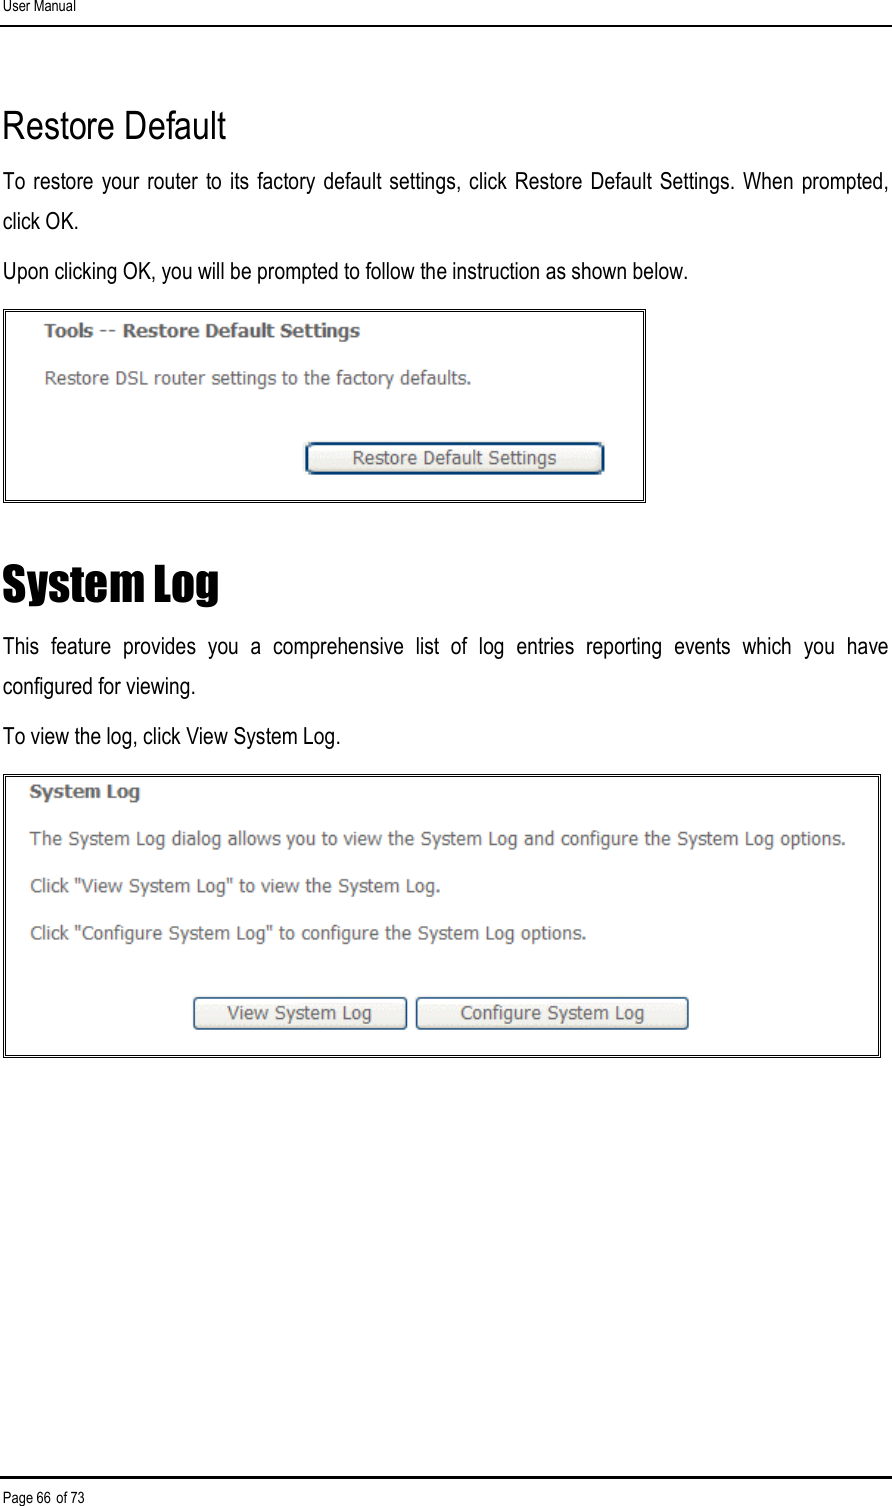 User Manual Page 66 of 73 Restore Default To restore  your router to  its factory default settings, click  Restore Default Settings. When  prompted, click OK. Upon clicking OK, you will be prompted to follow the instruction as shown below.  System Log This  feature  provides  you  a  comprehensive  list  of  log  entries  reporting  events  which  you  have configured for viewing. To view the log, click View System Log.  